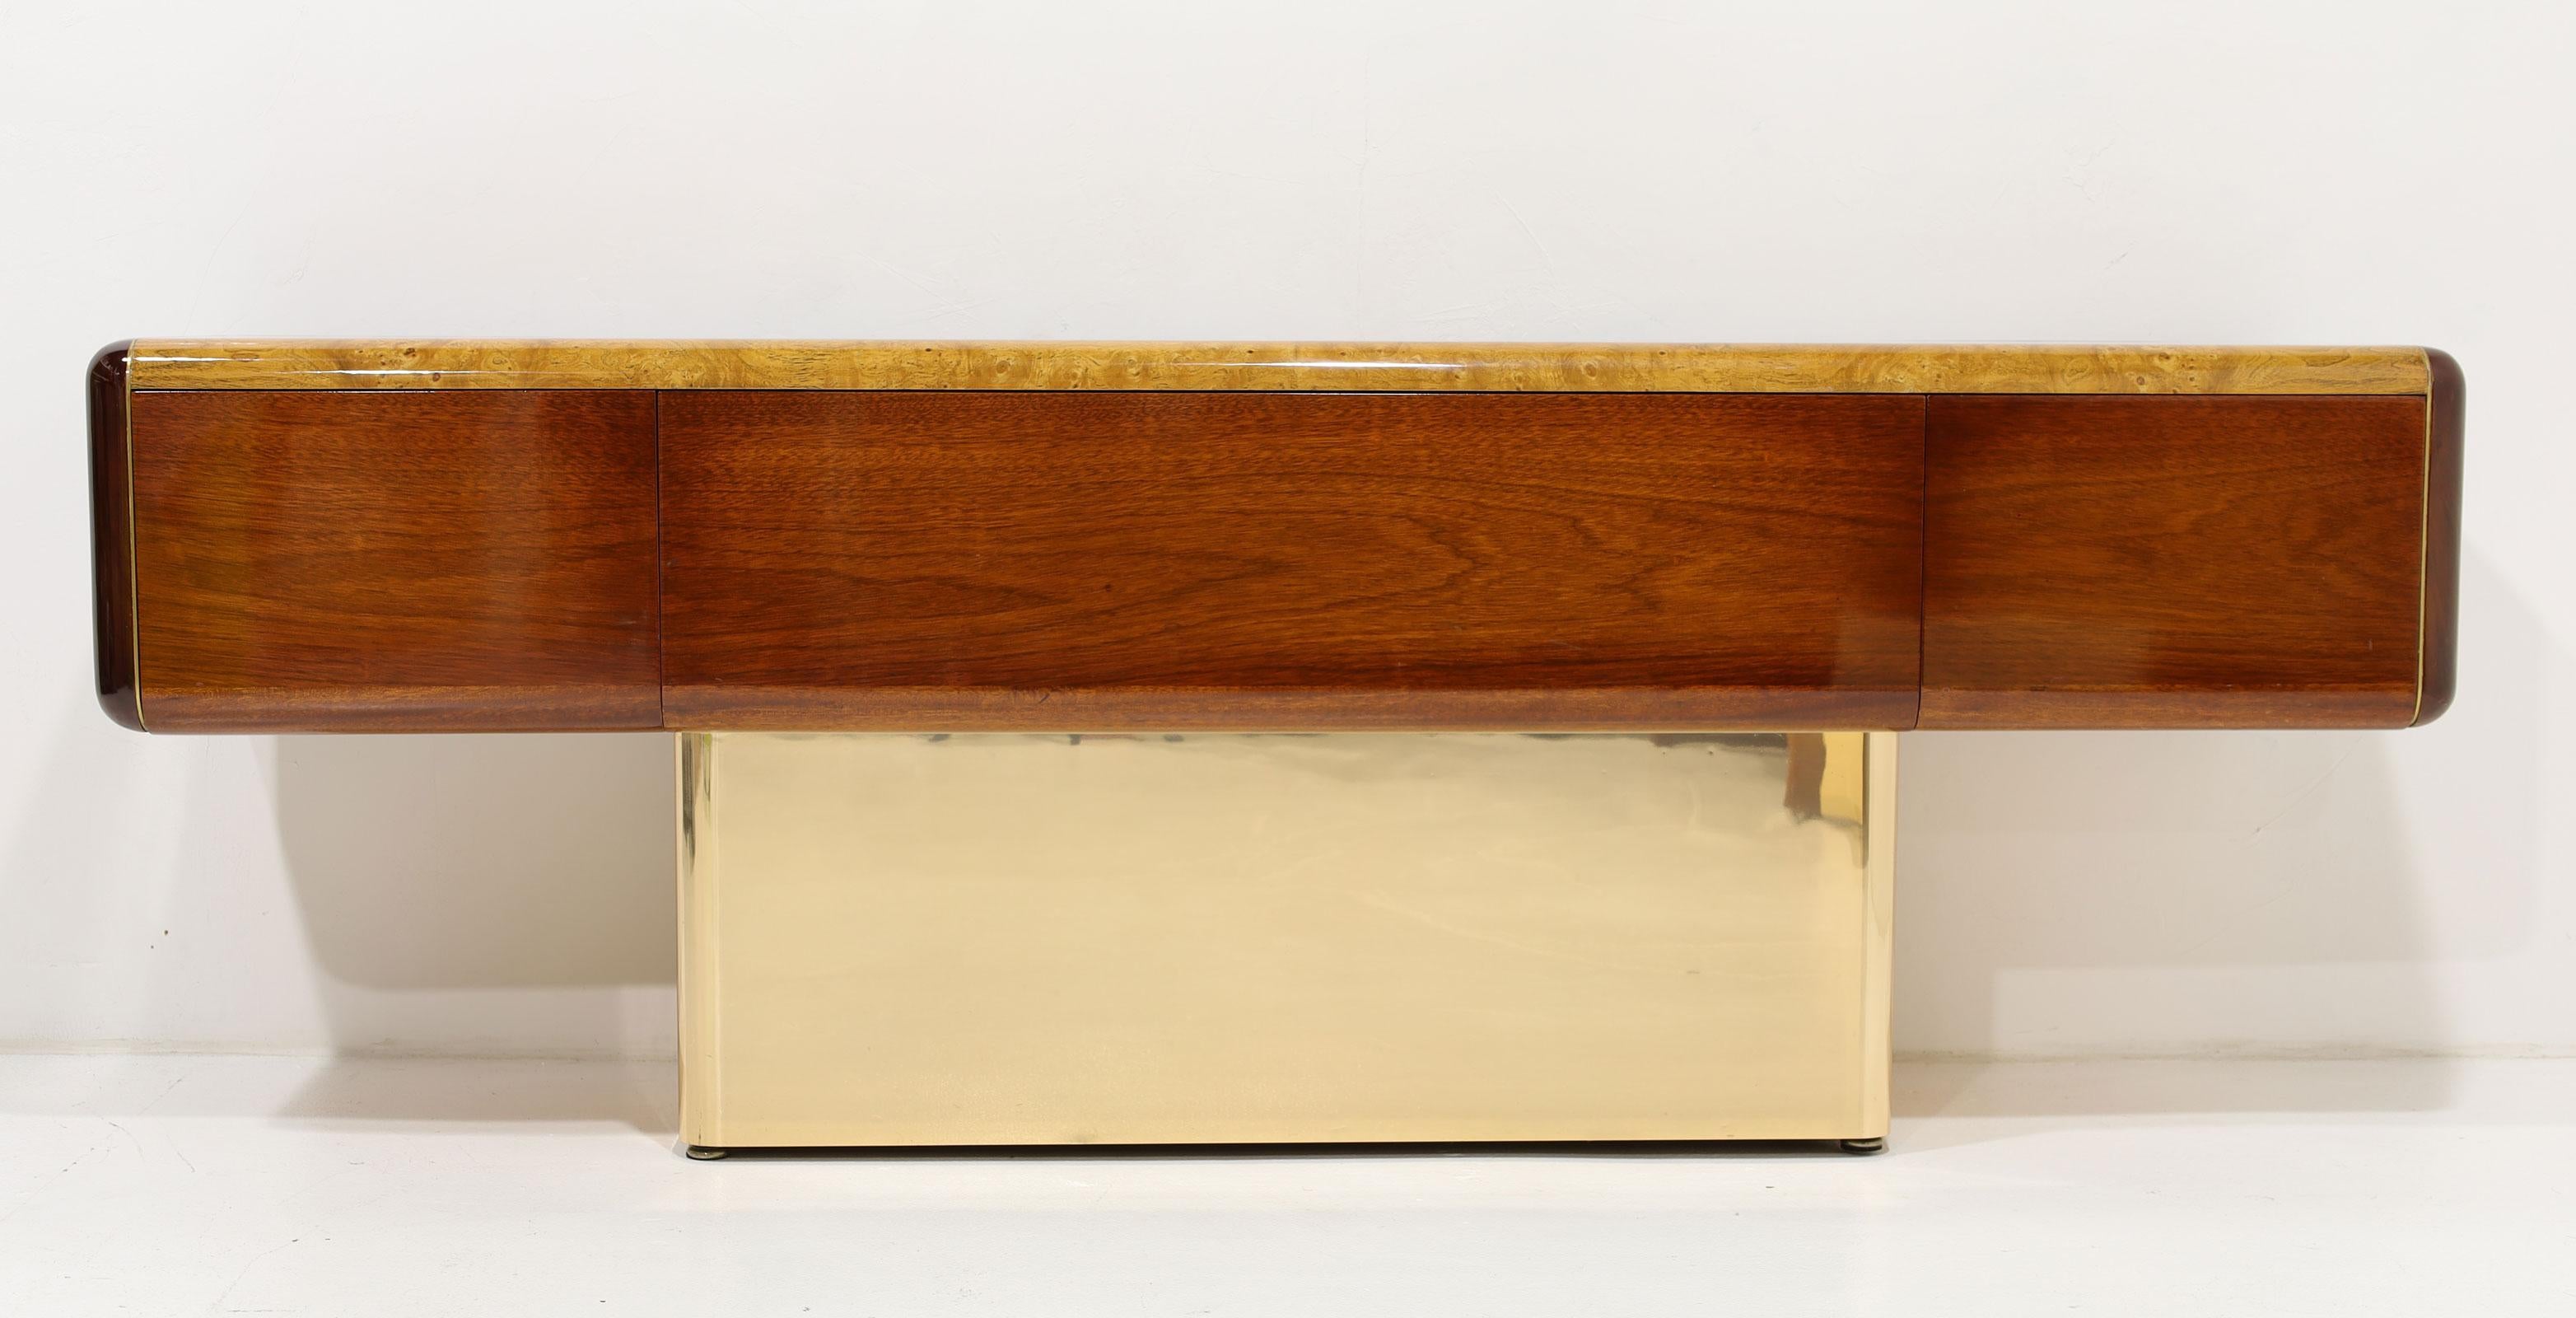 Stunning handcrafted desk by Vladimir Kagan. Desk features a burl wood top and mahogany surround, both highly polished. Base is wood with a brass finish metal overlay. There is a brass inlay between mahogany and burl. The desk features three